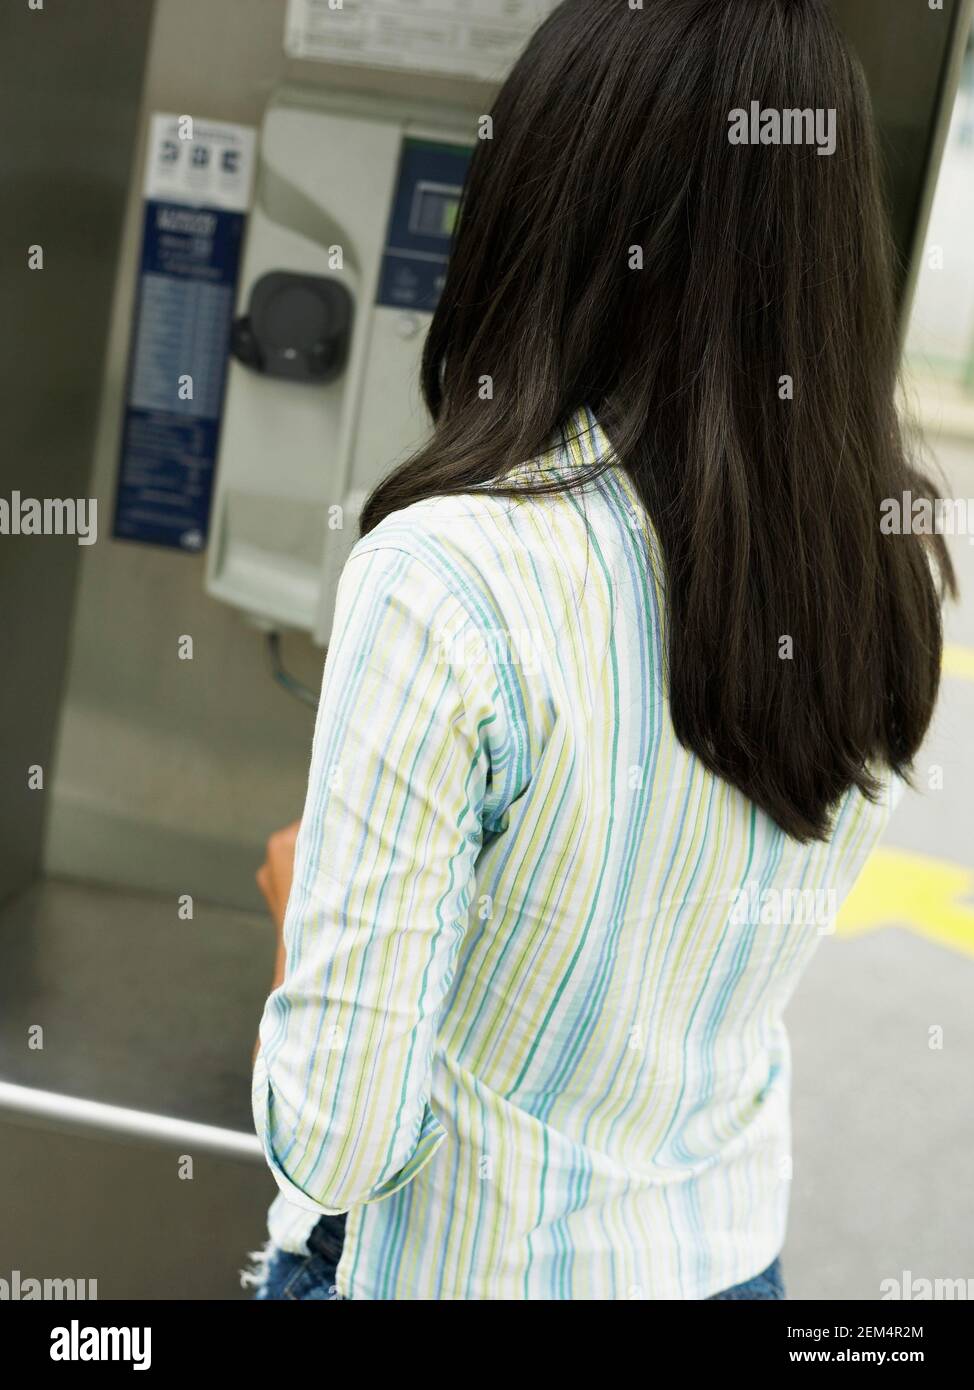 Rear view of a teenage girl in front of a pay phone Stock Photo